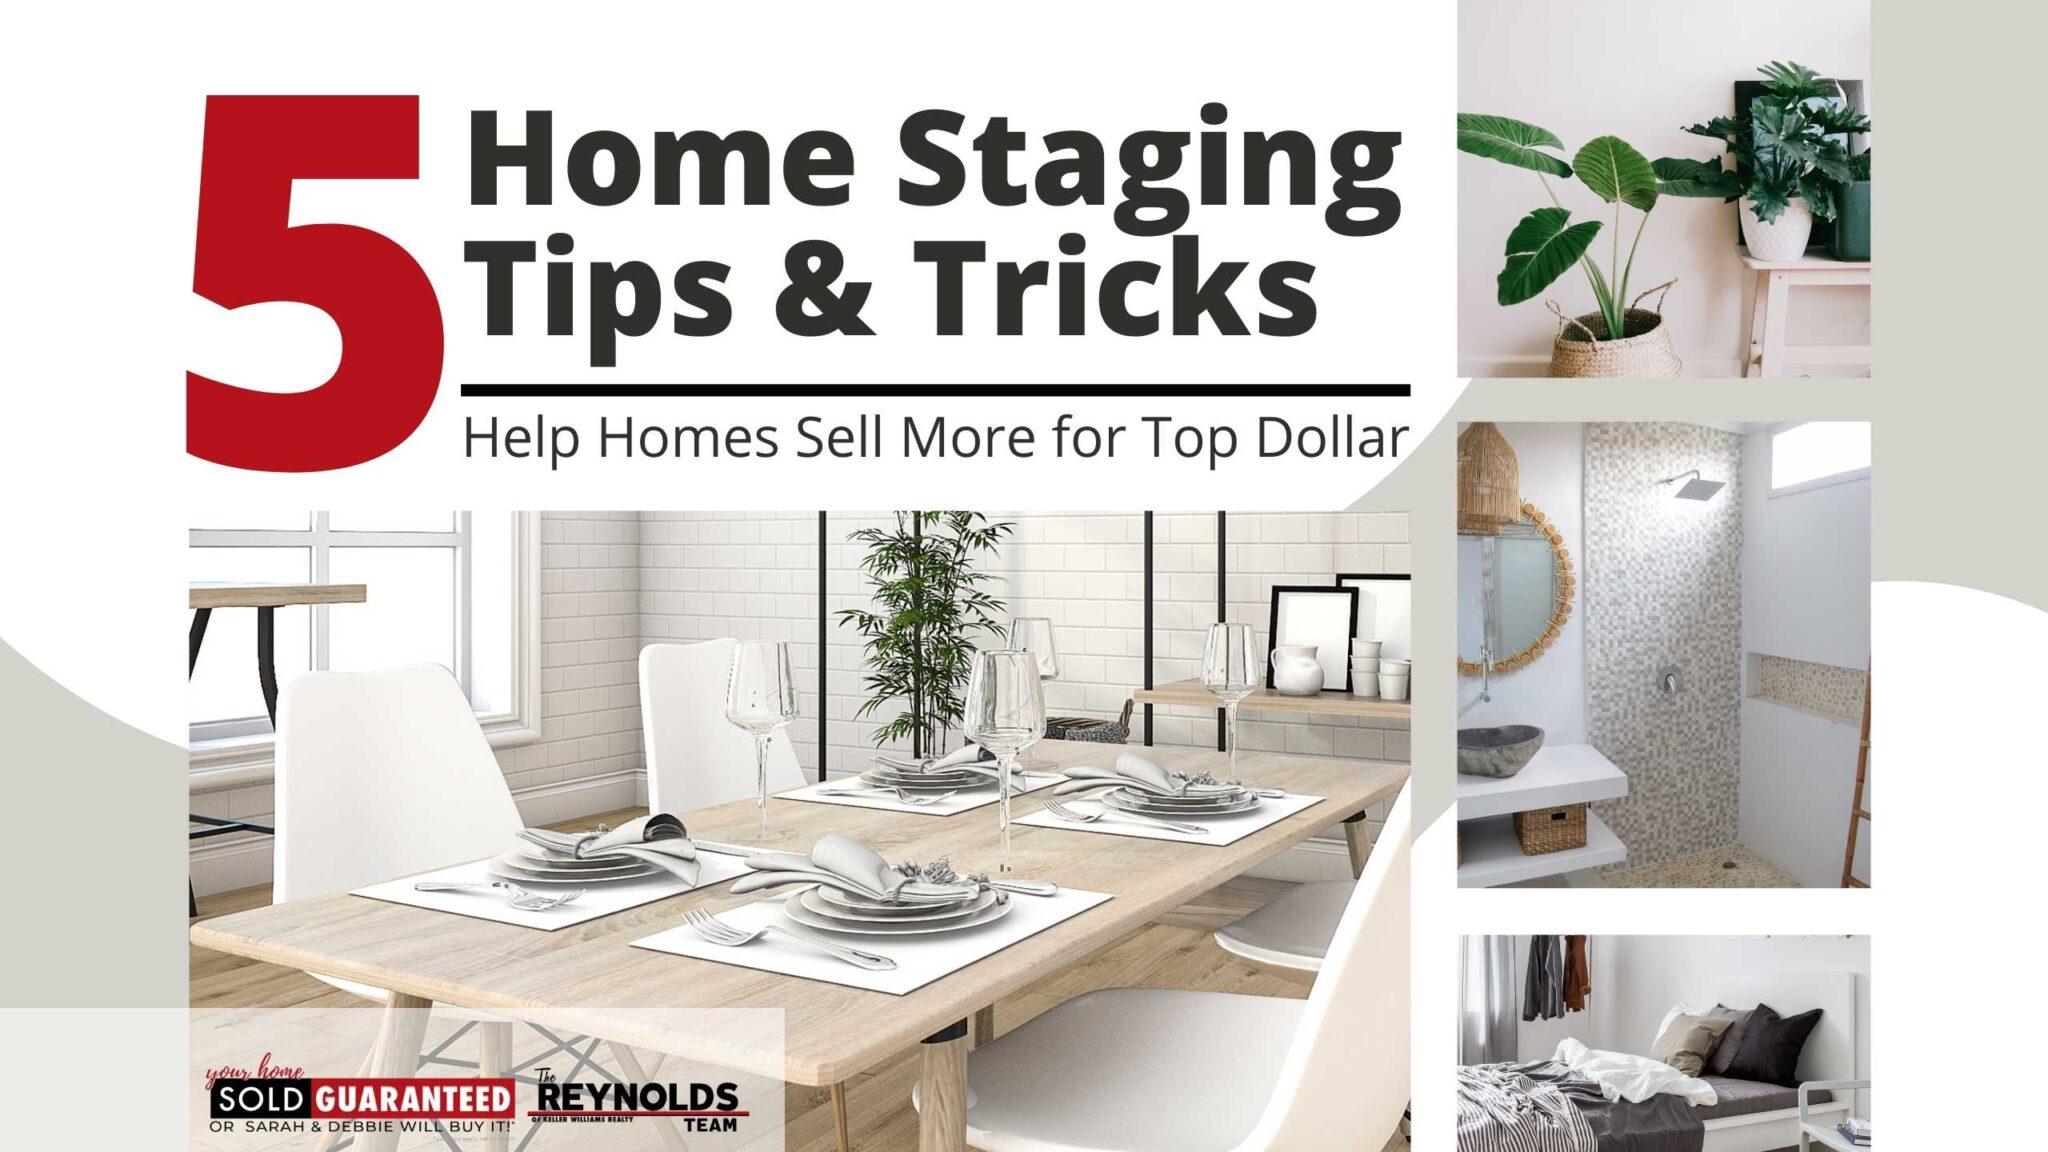 Little Known Staging Tips That Help Homes Sell More Top Dollar in The DC Metro Area